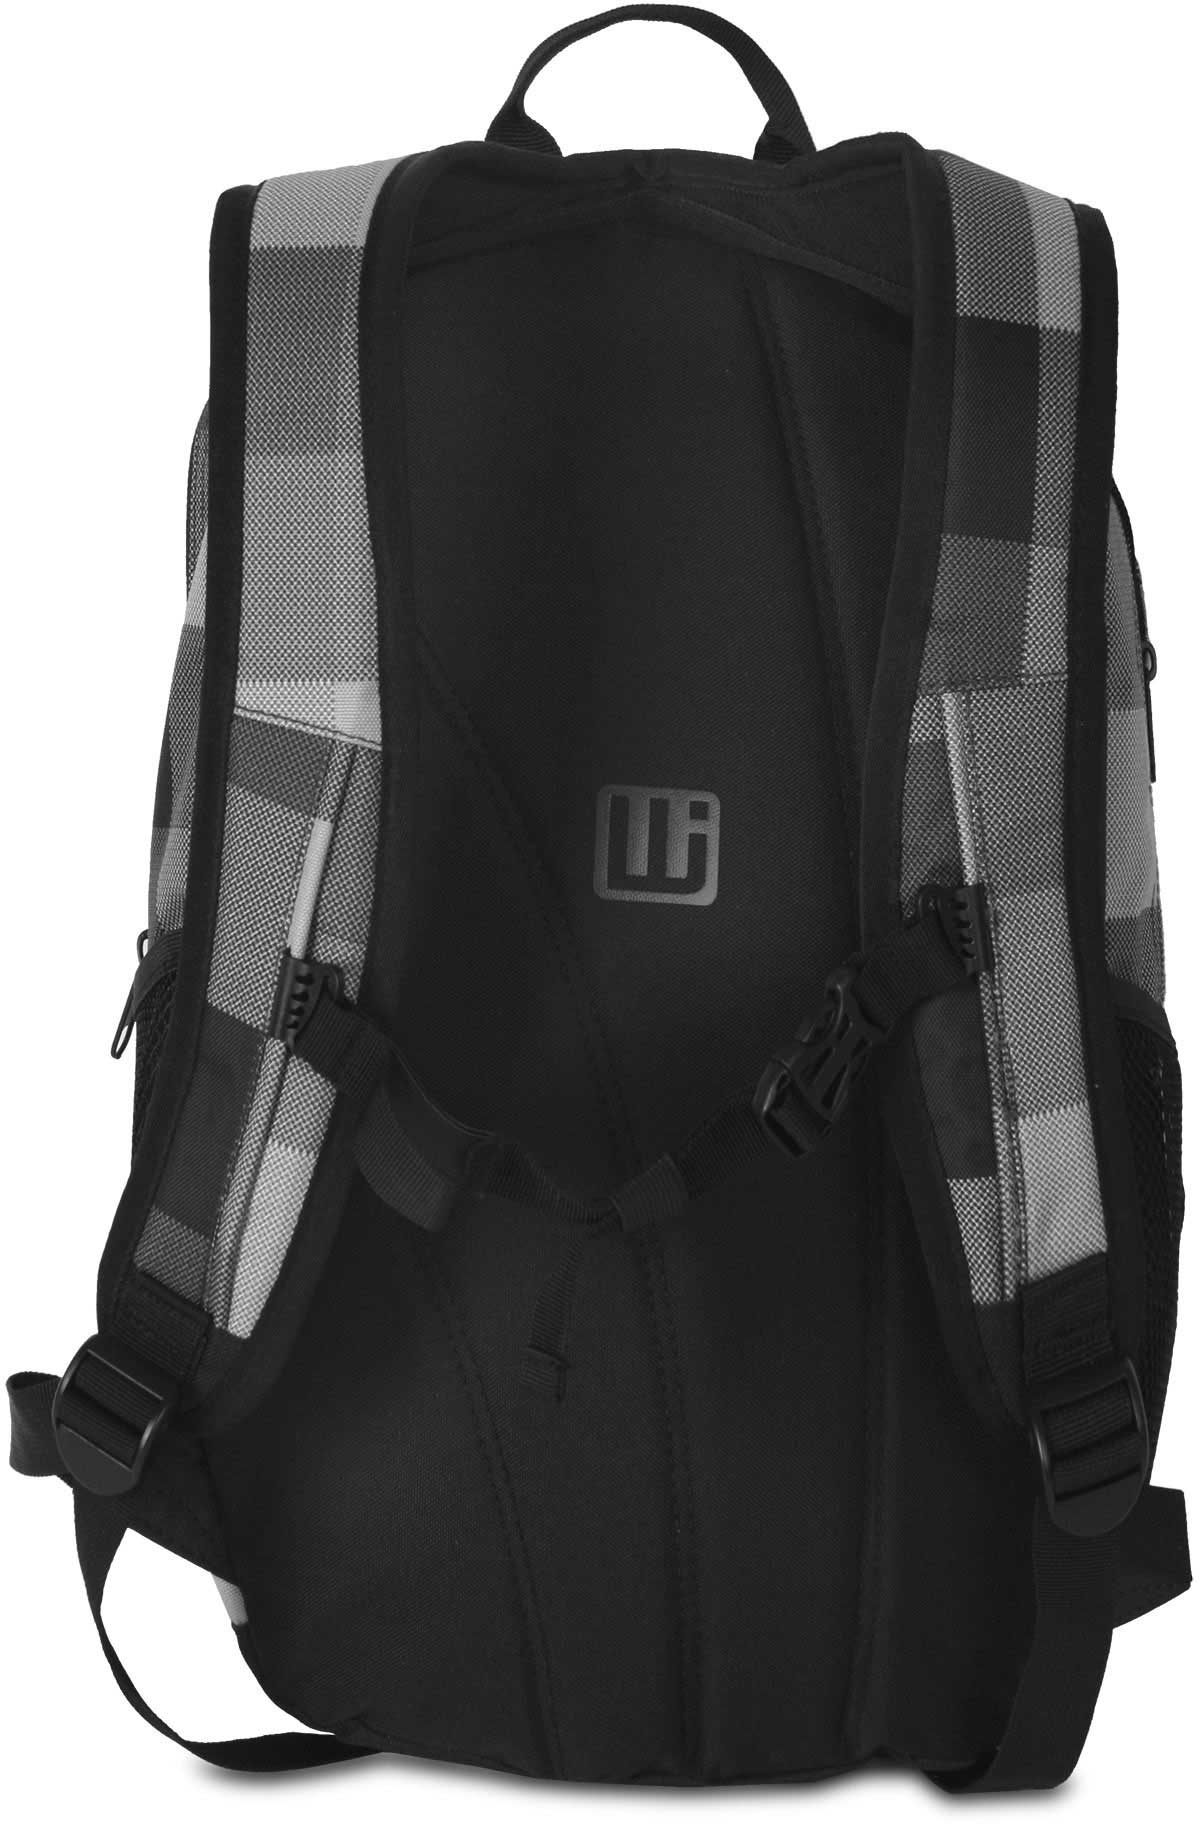 INA 25 - City backpack